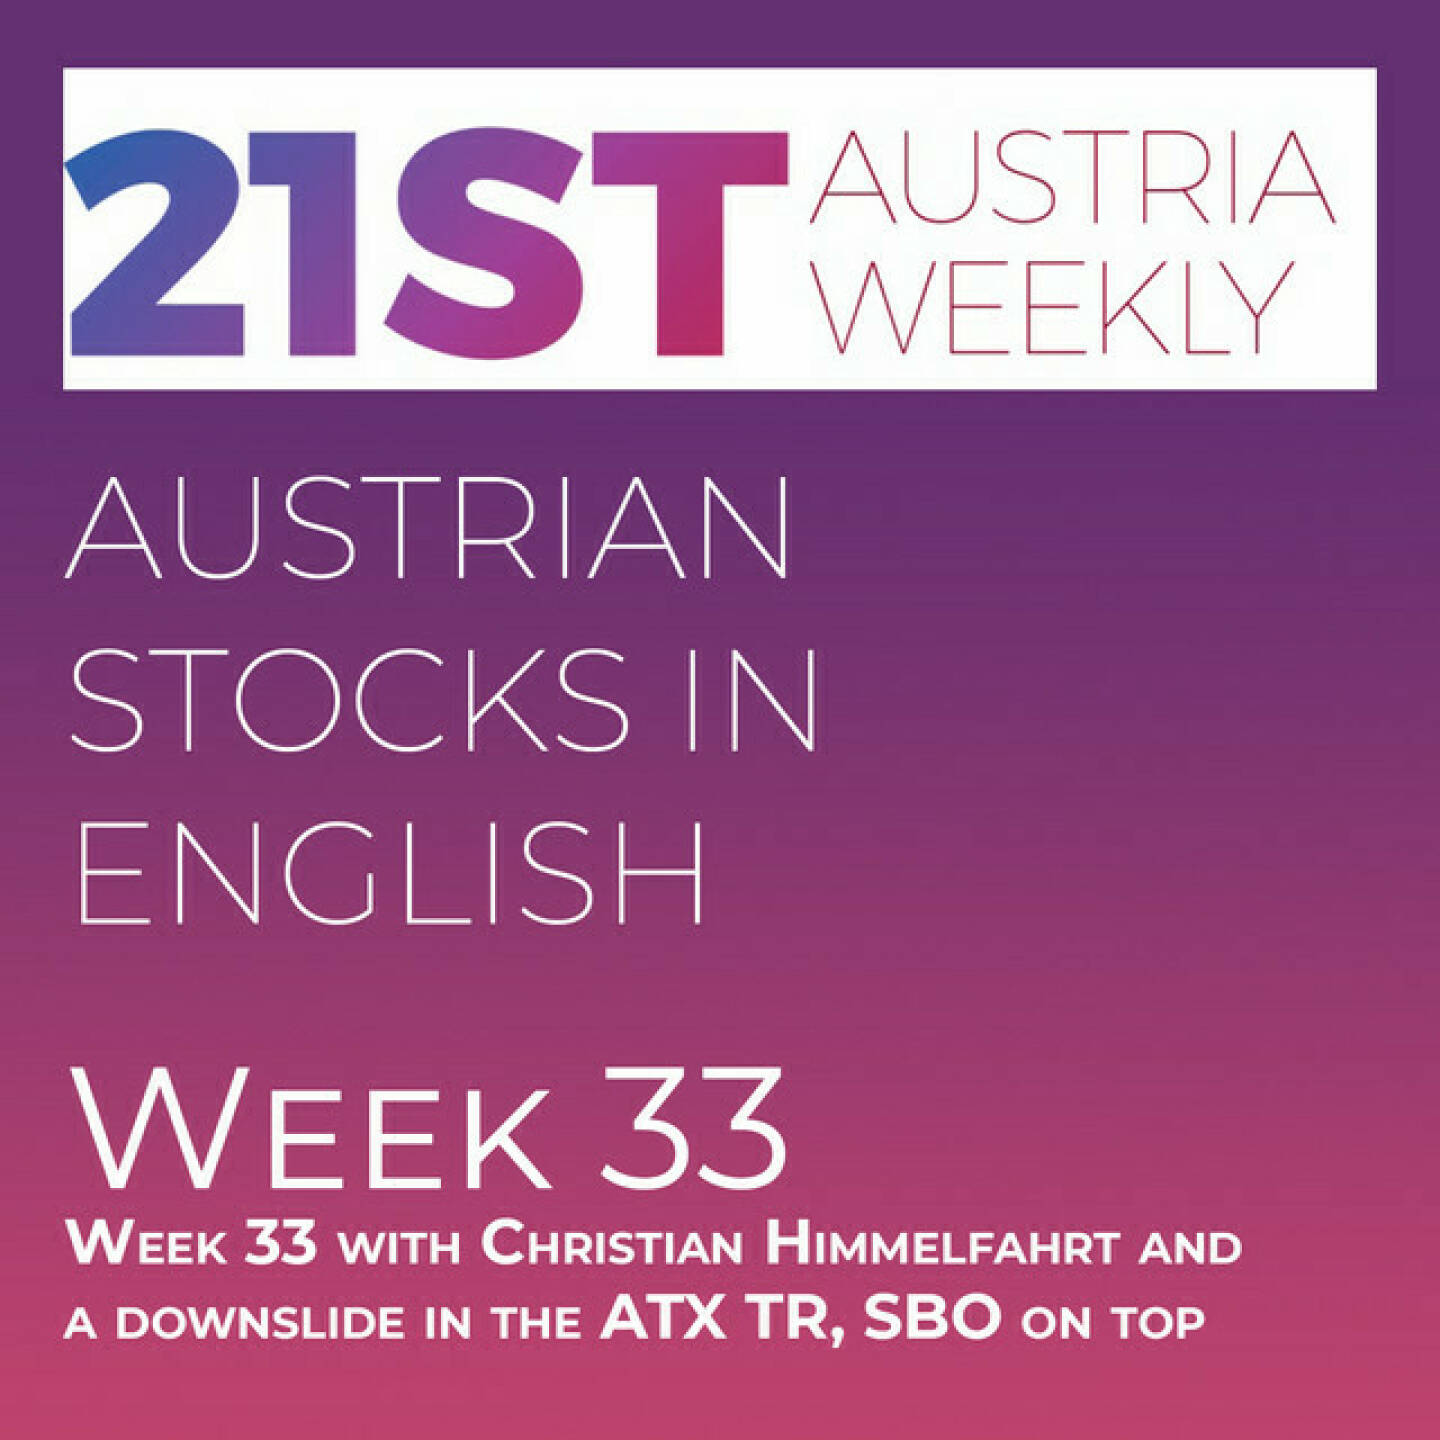 https://open.spotify.com/episode/4Wof4tlv0KMc2XIhRTcZVK
Austrian Stocks in English: Week 33 with Christian Himmelfahrt and a downslide in the ATX TR, SBO on top - <p>Welcome to &#34;Austrian Stocks in English - presented by Palfinger&#34;, the new and weekly english spoken Summary for the Austrian Stock Market, positioned every Sunday in the mostly german languaged Podcast &#34; Christian Drastil - Wiener Börse, Sport Musik und Mehr“ .  Week 33 was a correction week to week 32, last week the ATX TR went up 2,1% to 6.515,1 points, this week we lost 2,41% to 6.357,97 points and we also fell back again under the moving average 100 days. Year-to-date the ATX TR is now at  minus 18,99%. Under the fewgGainers this were  SBO with &#43;6,04% in front of Rosenbauer &#43;4,58% and Verbund &#43;3,51%. Week 33 also had Christi Himmelfahrt, a Holiday with trading at the begin and the August Settlement with futures and options at the end .News came from LLB, Addiko Group, Wiener Börse, Semperit and Uniqa. spoken nwo by th absolutely smart Alison.</p>